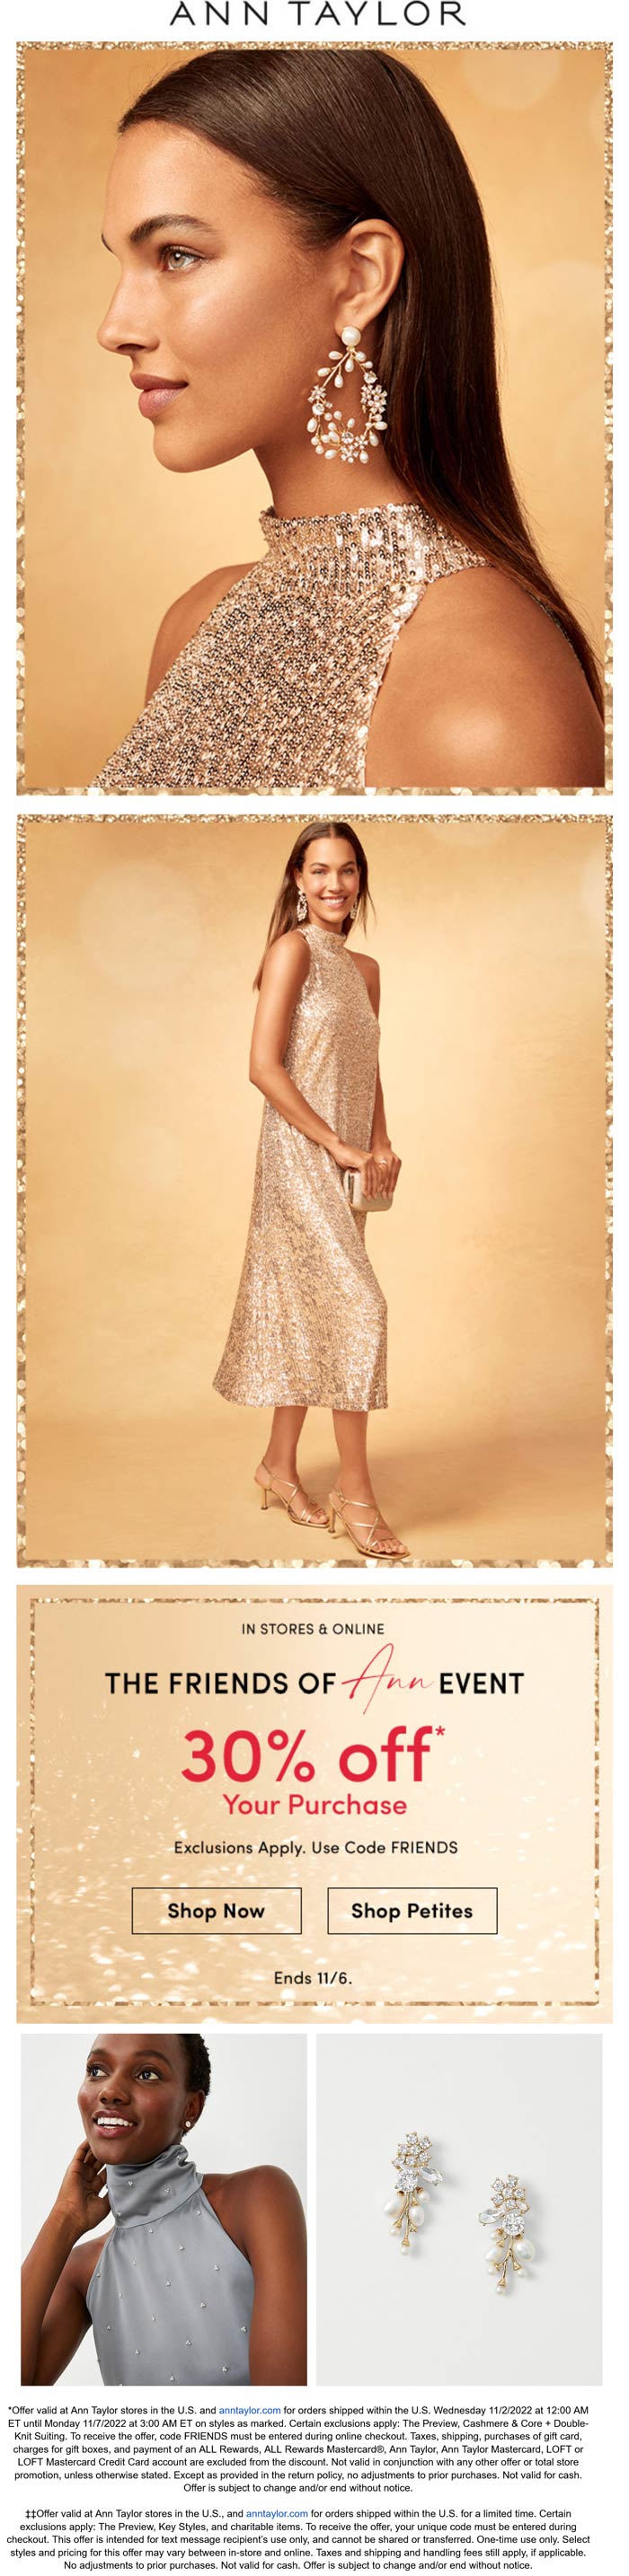 Ann Taylor stores Coupon  30% off at Ann Taylor, or online via promo code FRIENDS #anntaylor 